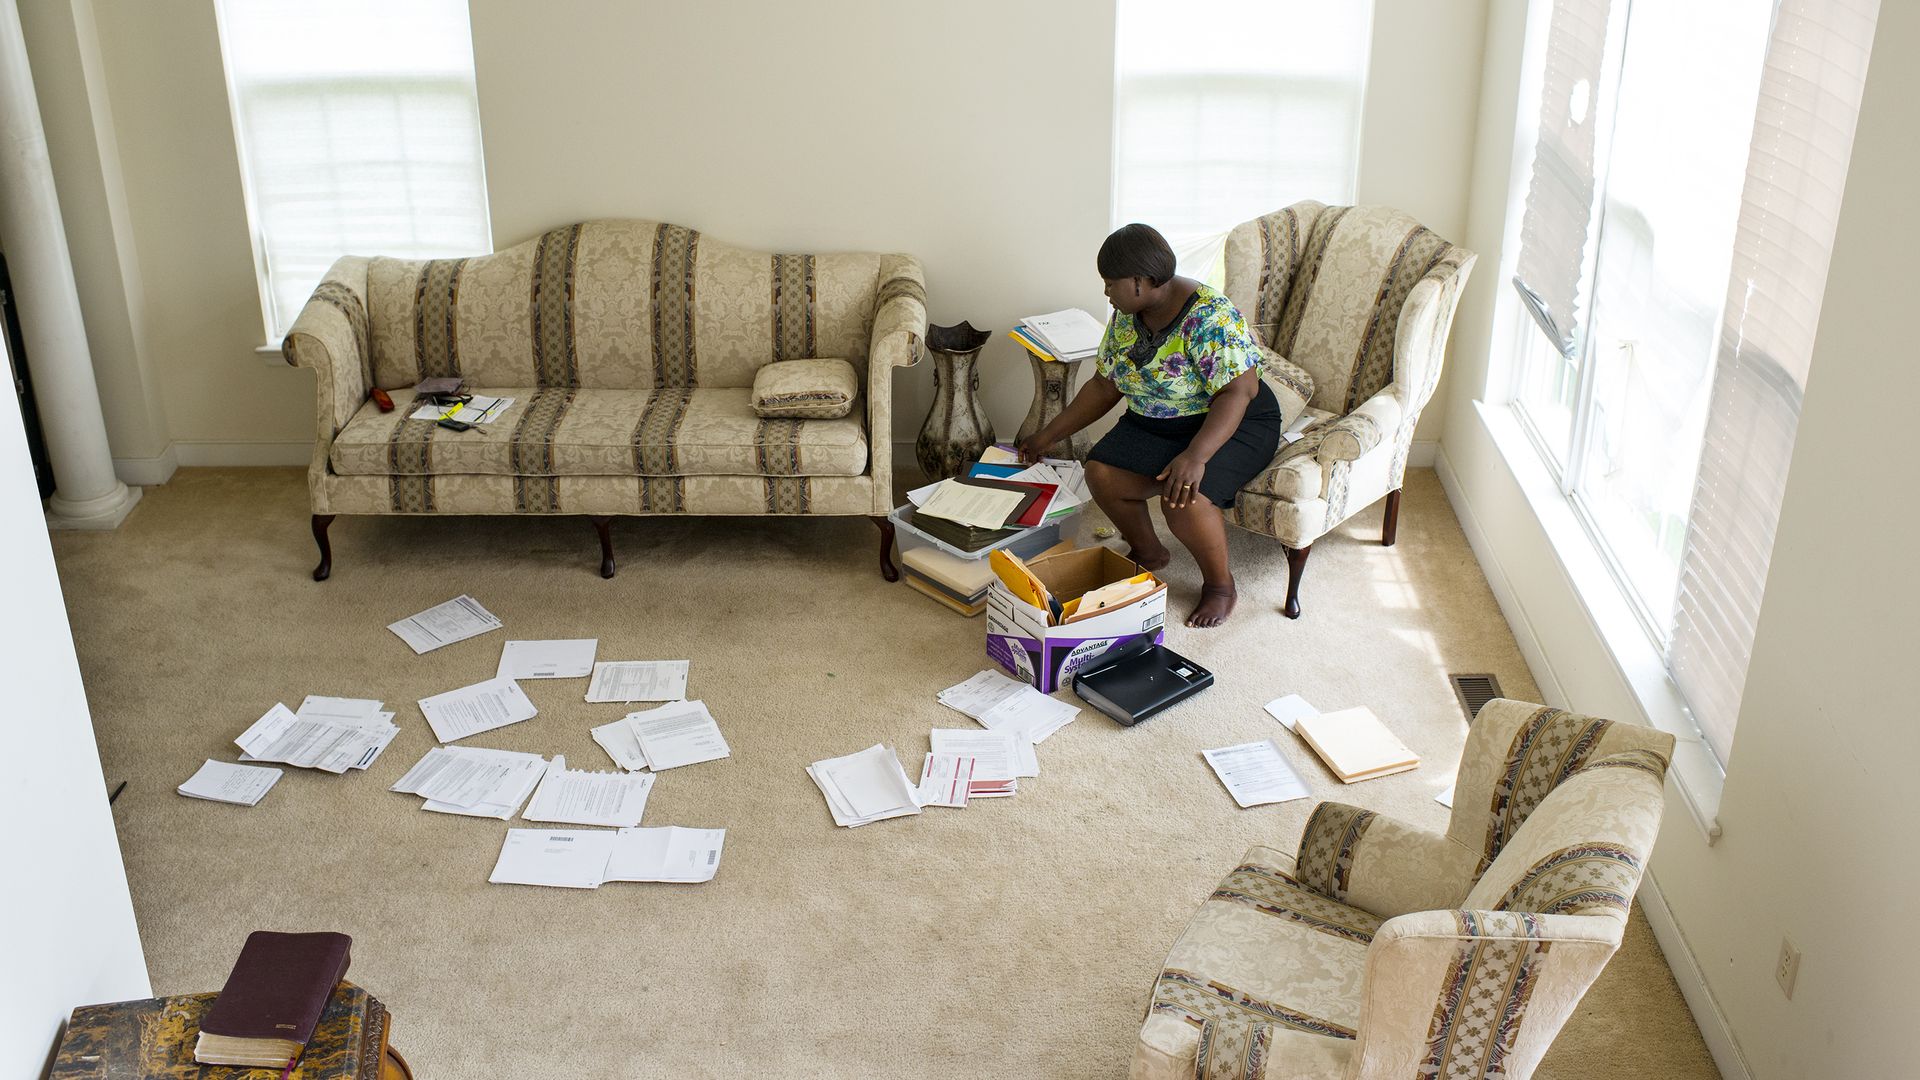 A woman sits in a room with papers scattered on the floor.